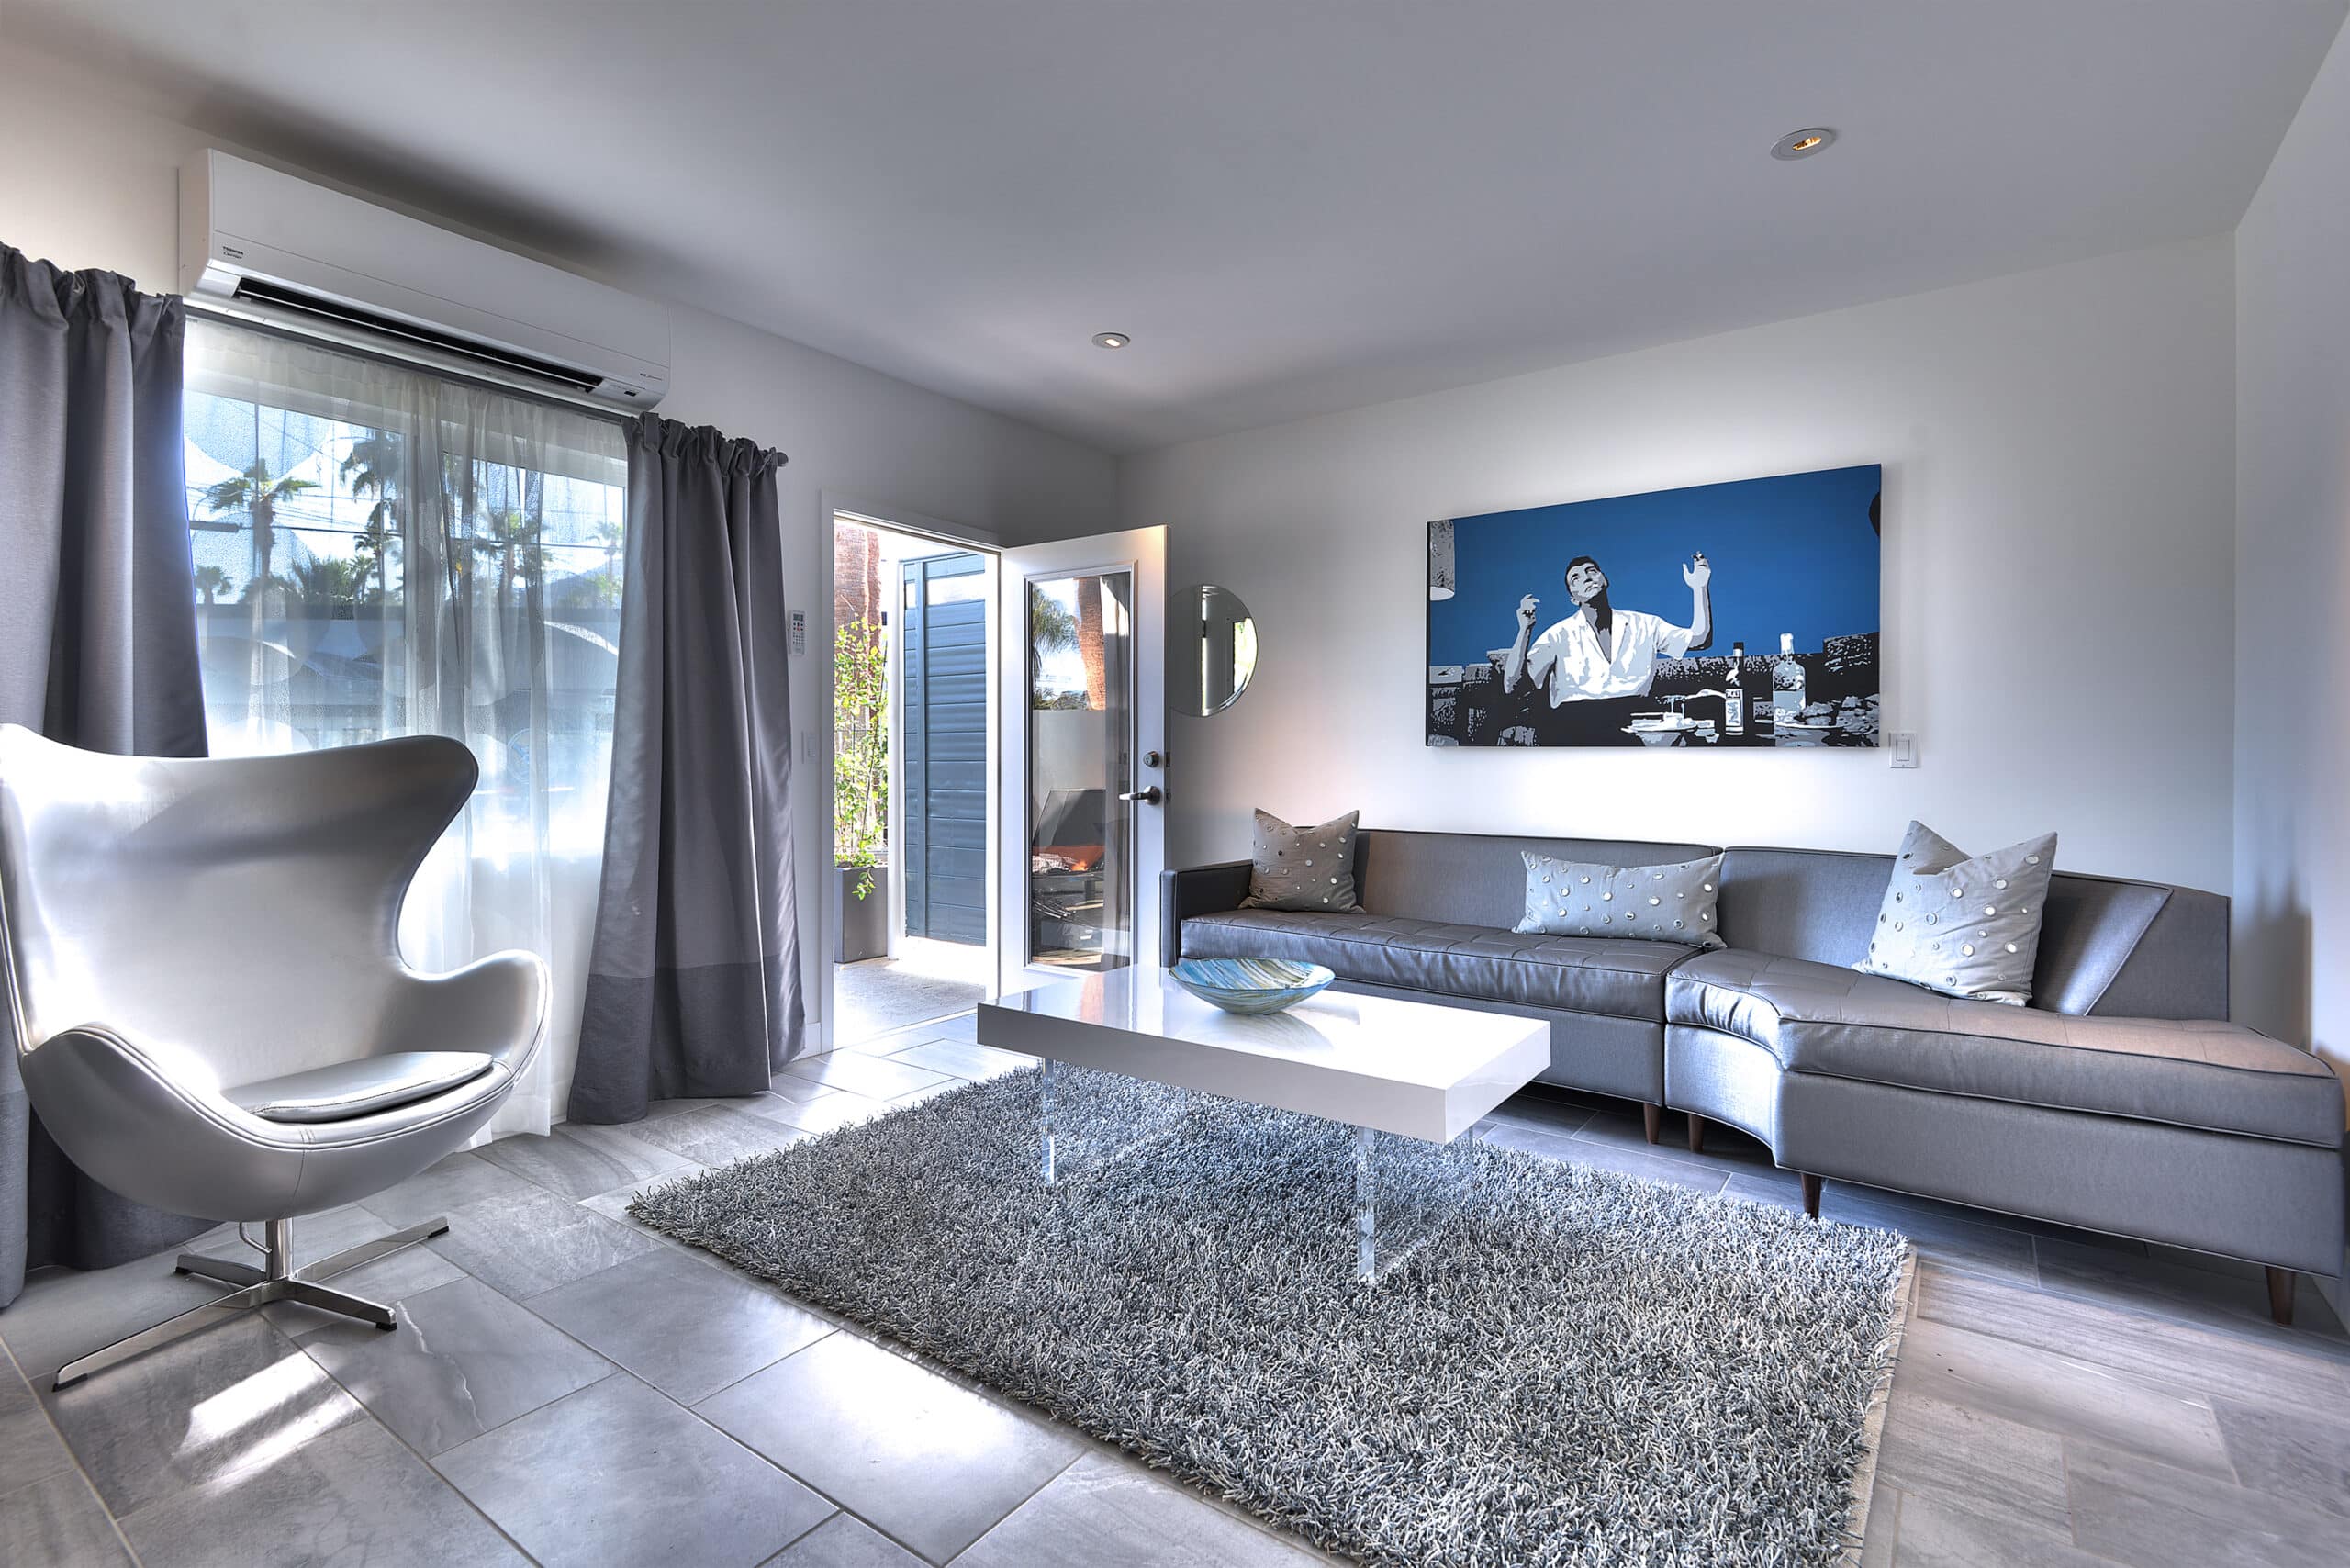 A modern living room with a sectional gray sofa, white designer chair, shaggy area rug, and a large monochromatic wall art above the couch. Glass doors lead to the exterior, and the room is brightly lit with natural light.